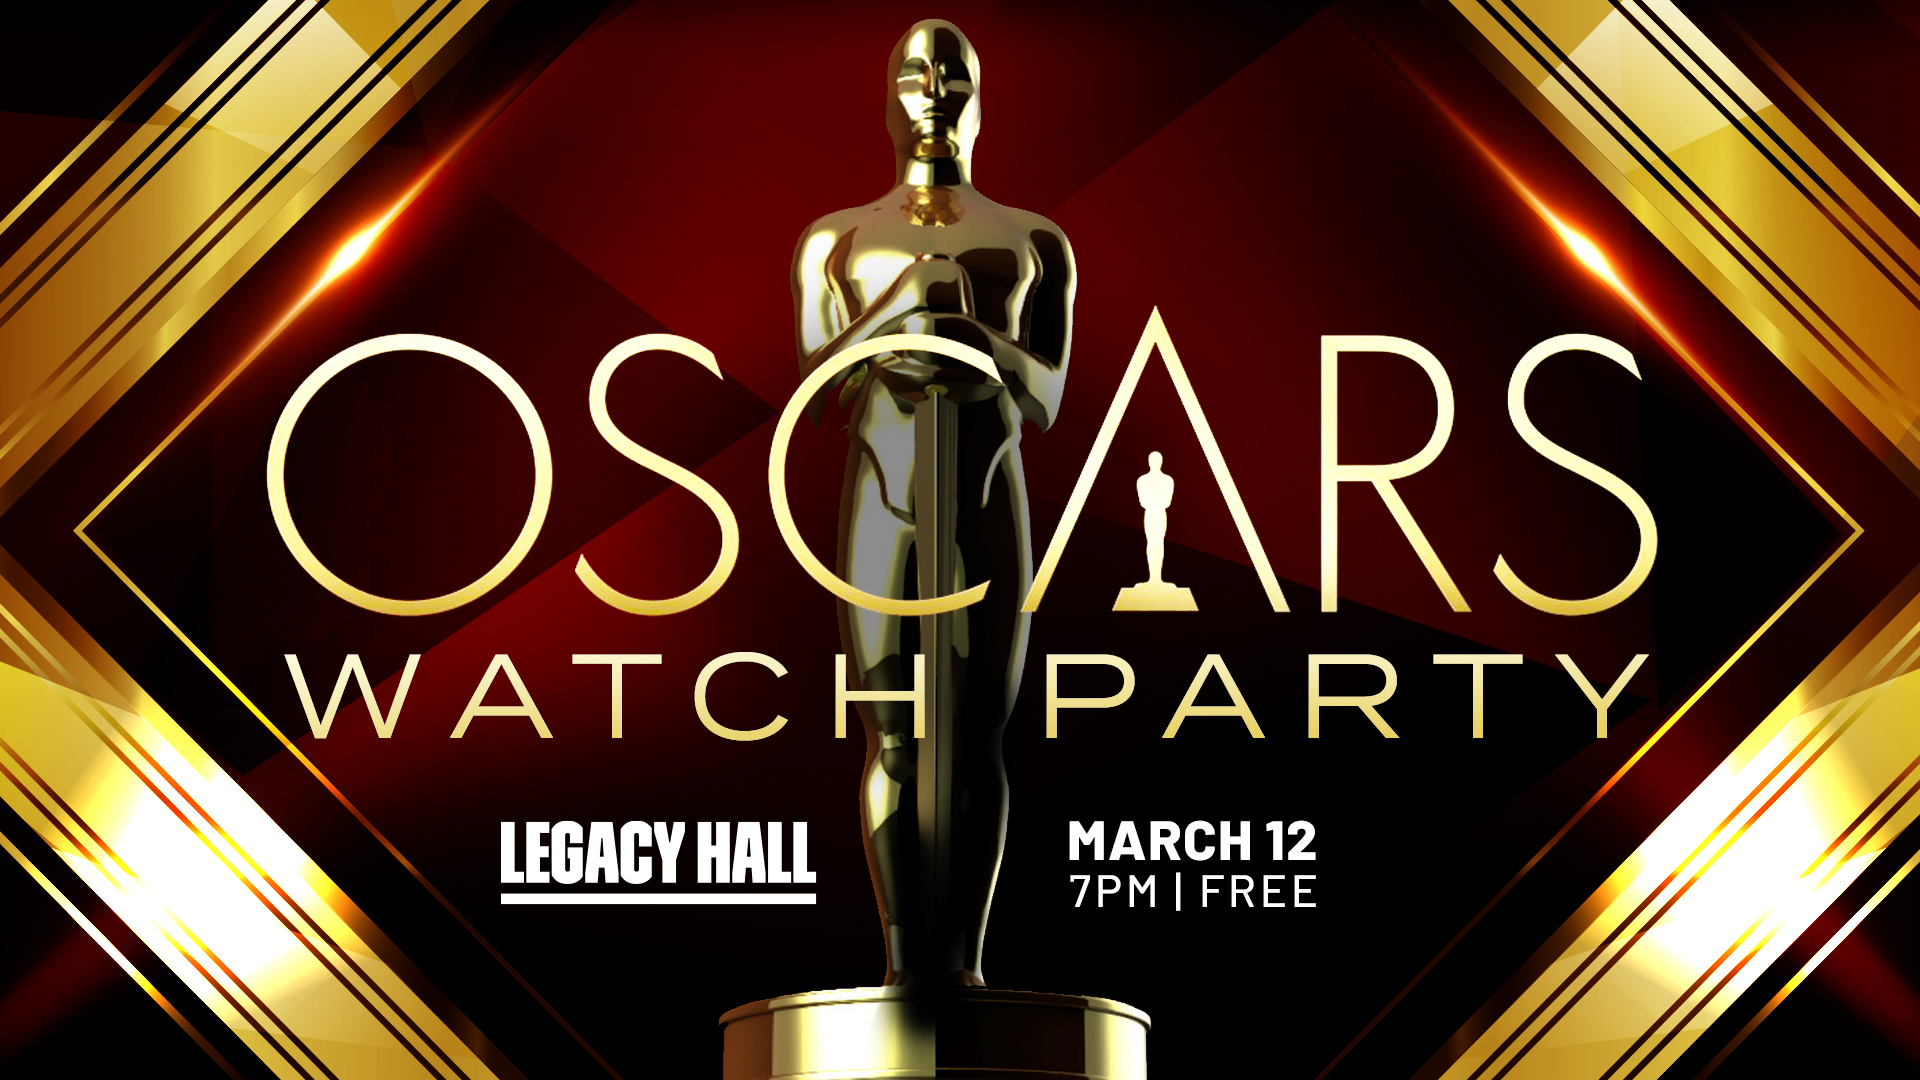 Oscars Watch Party at Legacy Hall Legacy Hall